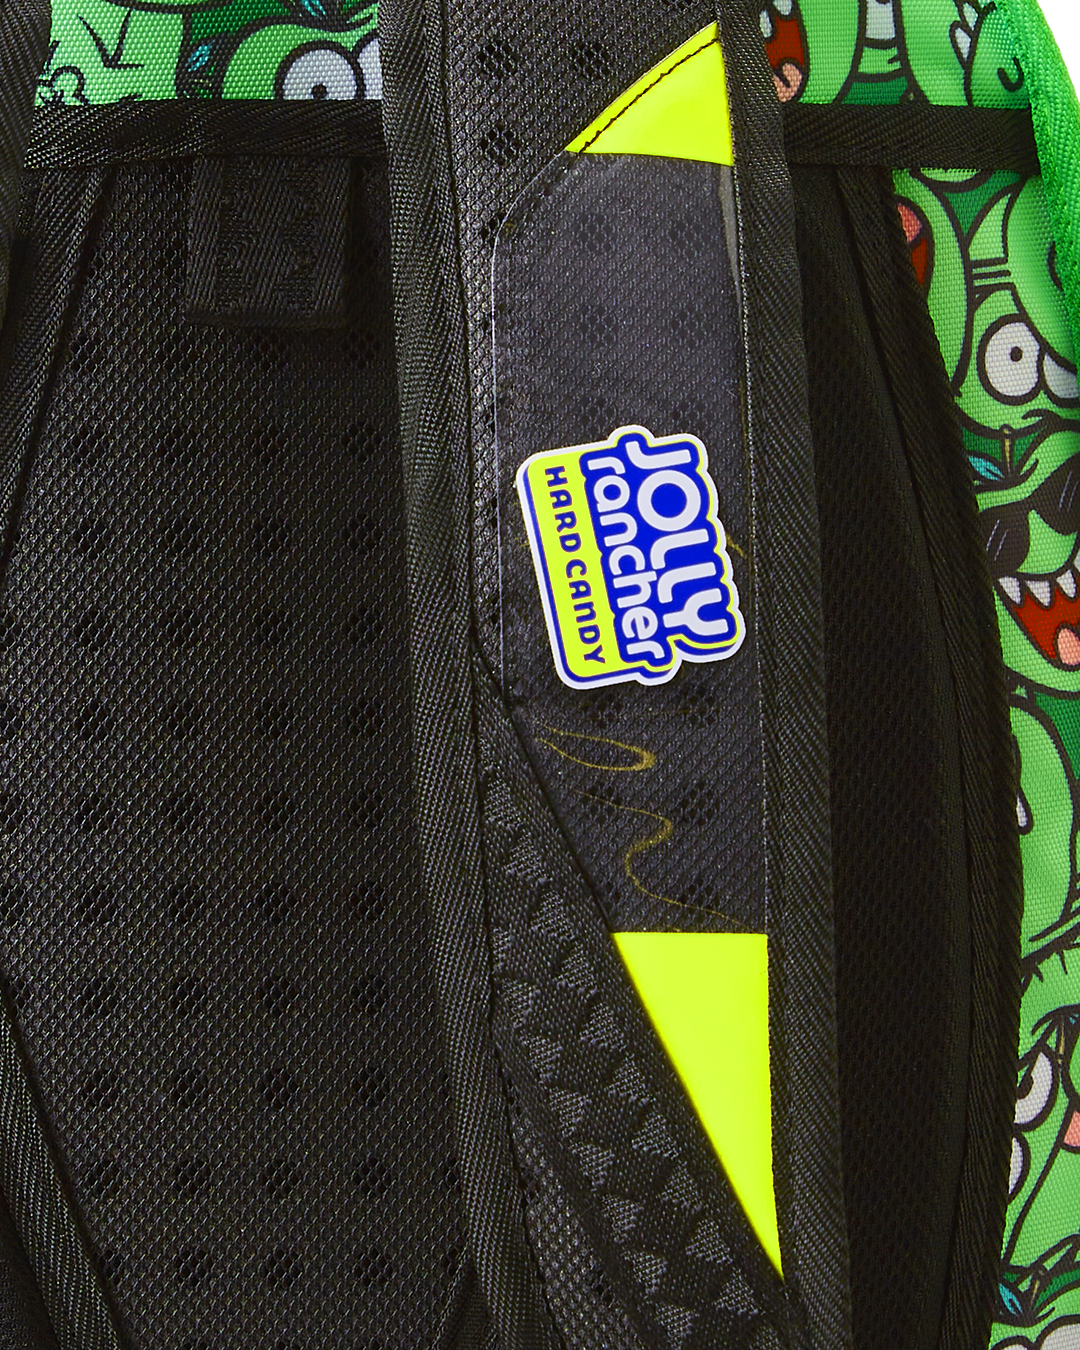 Jolly Rancher Sprayground Backpack Review 